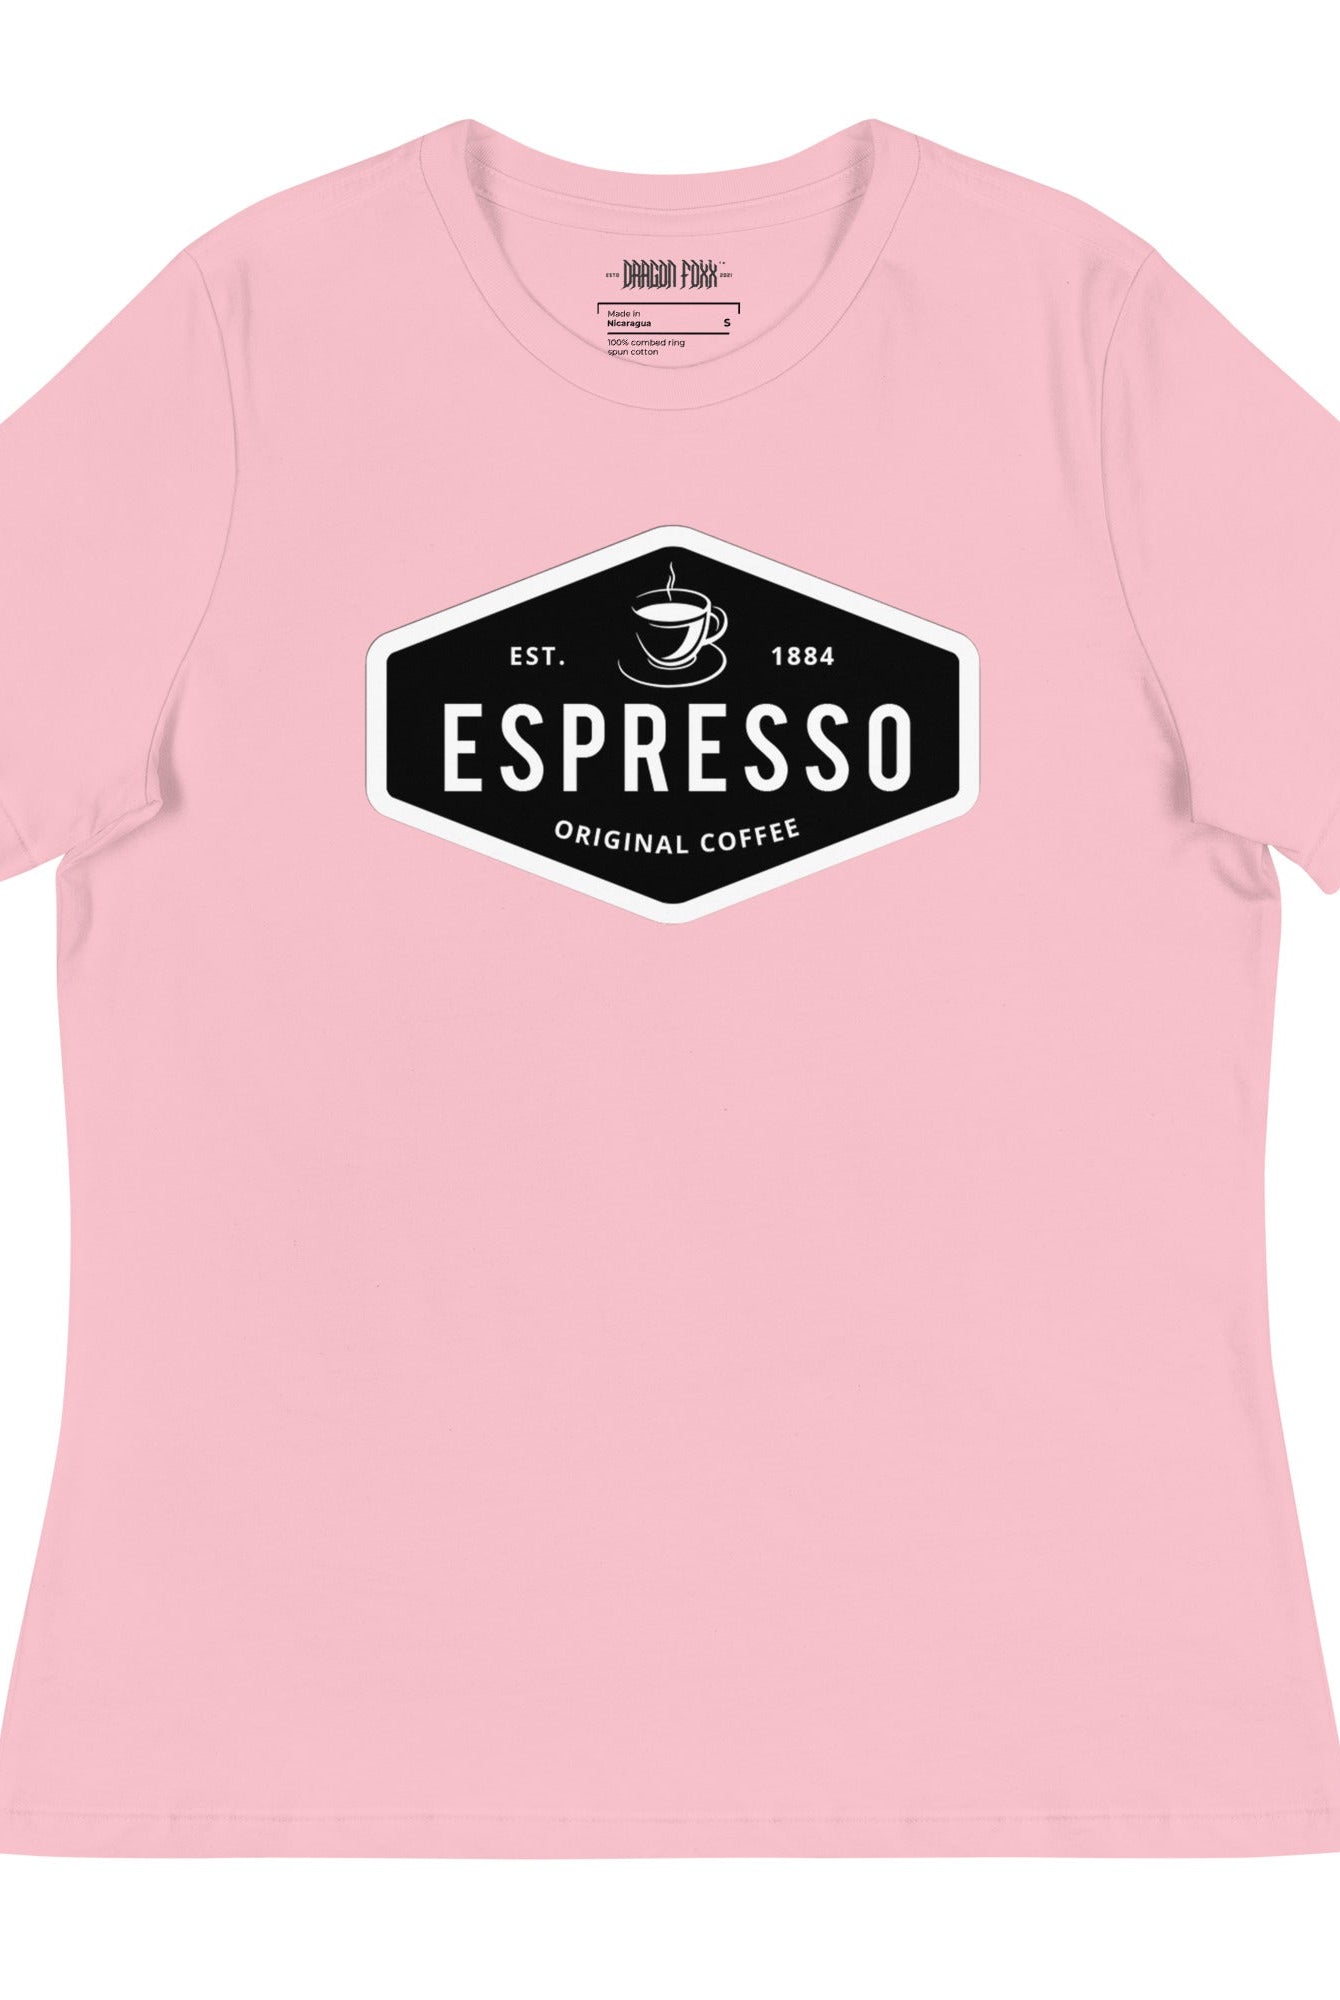 ESPRESSO - Women's Relaxed Fit Graphic T-Shirt in 16 Colors - Women's Relaxed Fit Graphic T-Shirt - DRAGON FOXX™ - 7218598_10241 - Pink - S - Athletic Heather T-shirt - Berry T-shirt - Black T-shirt